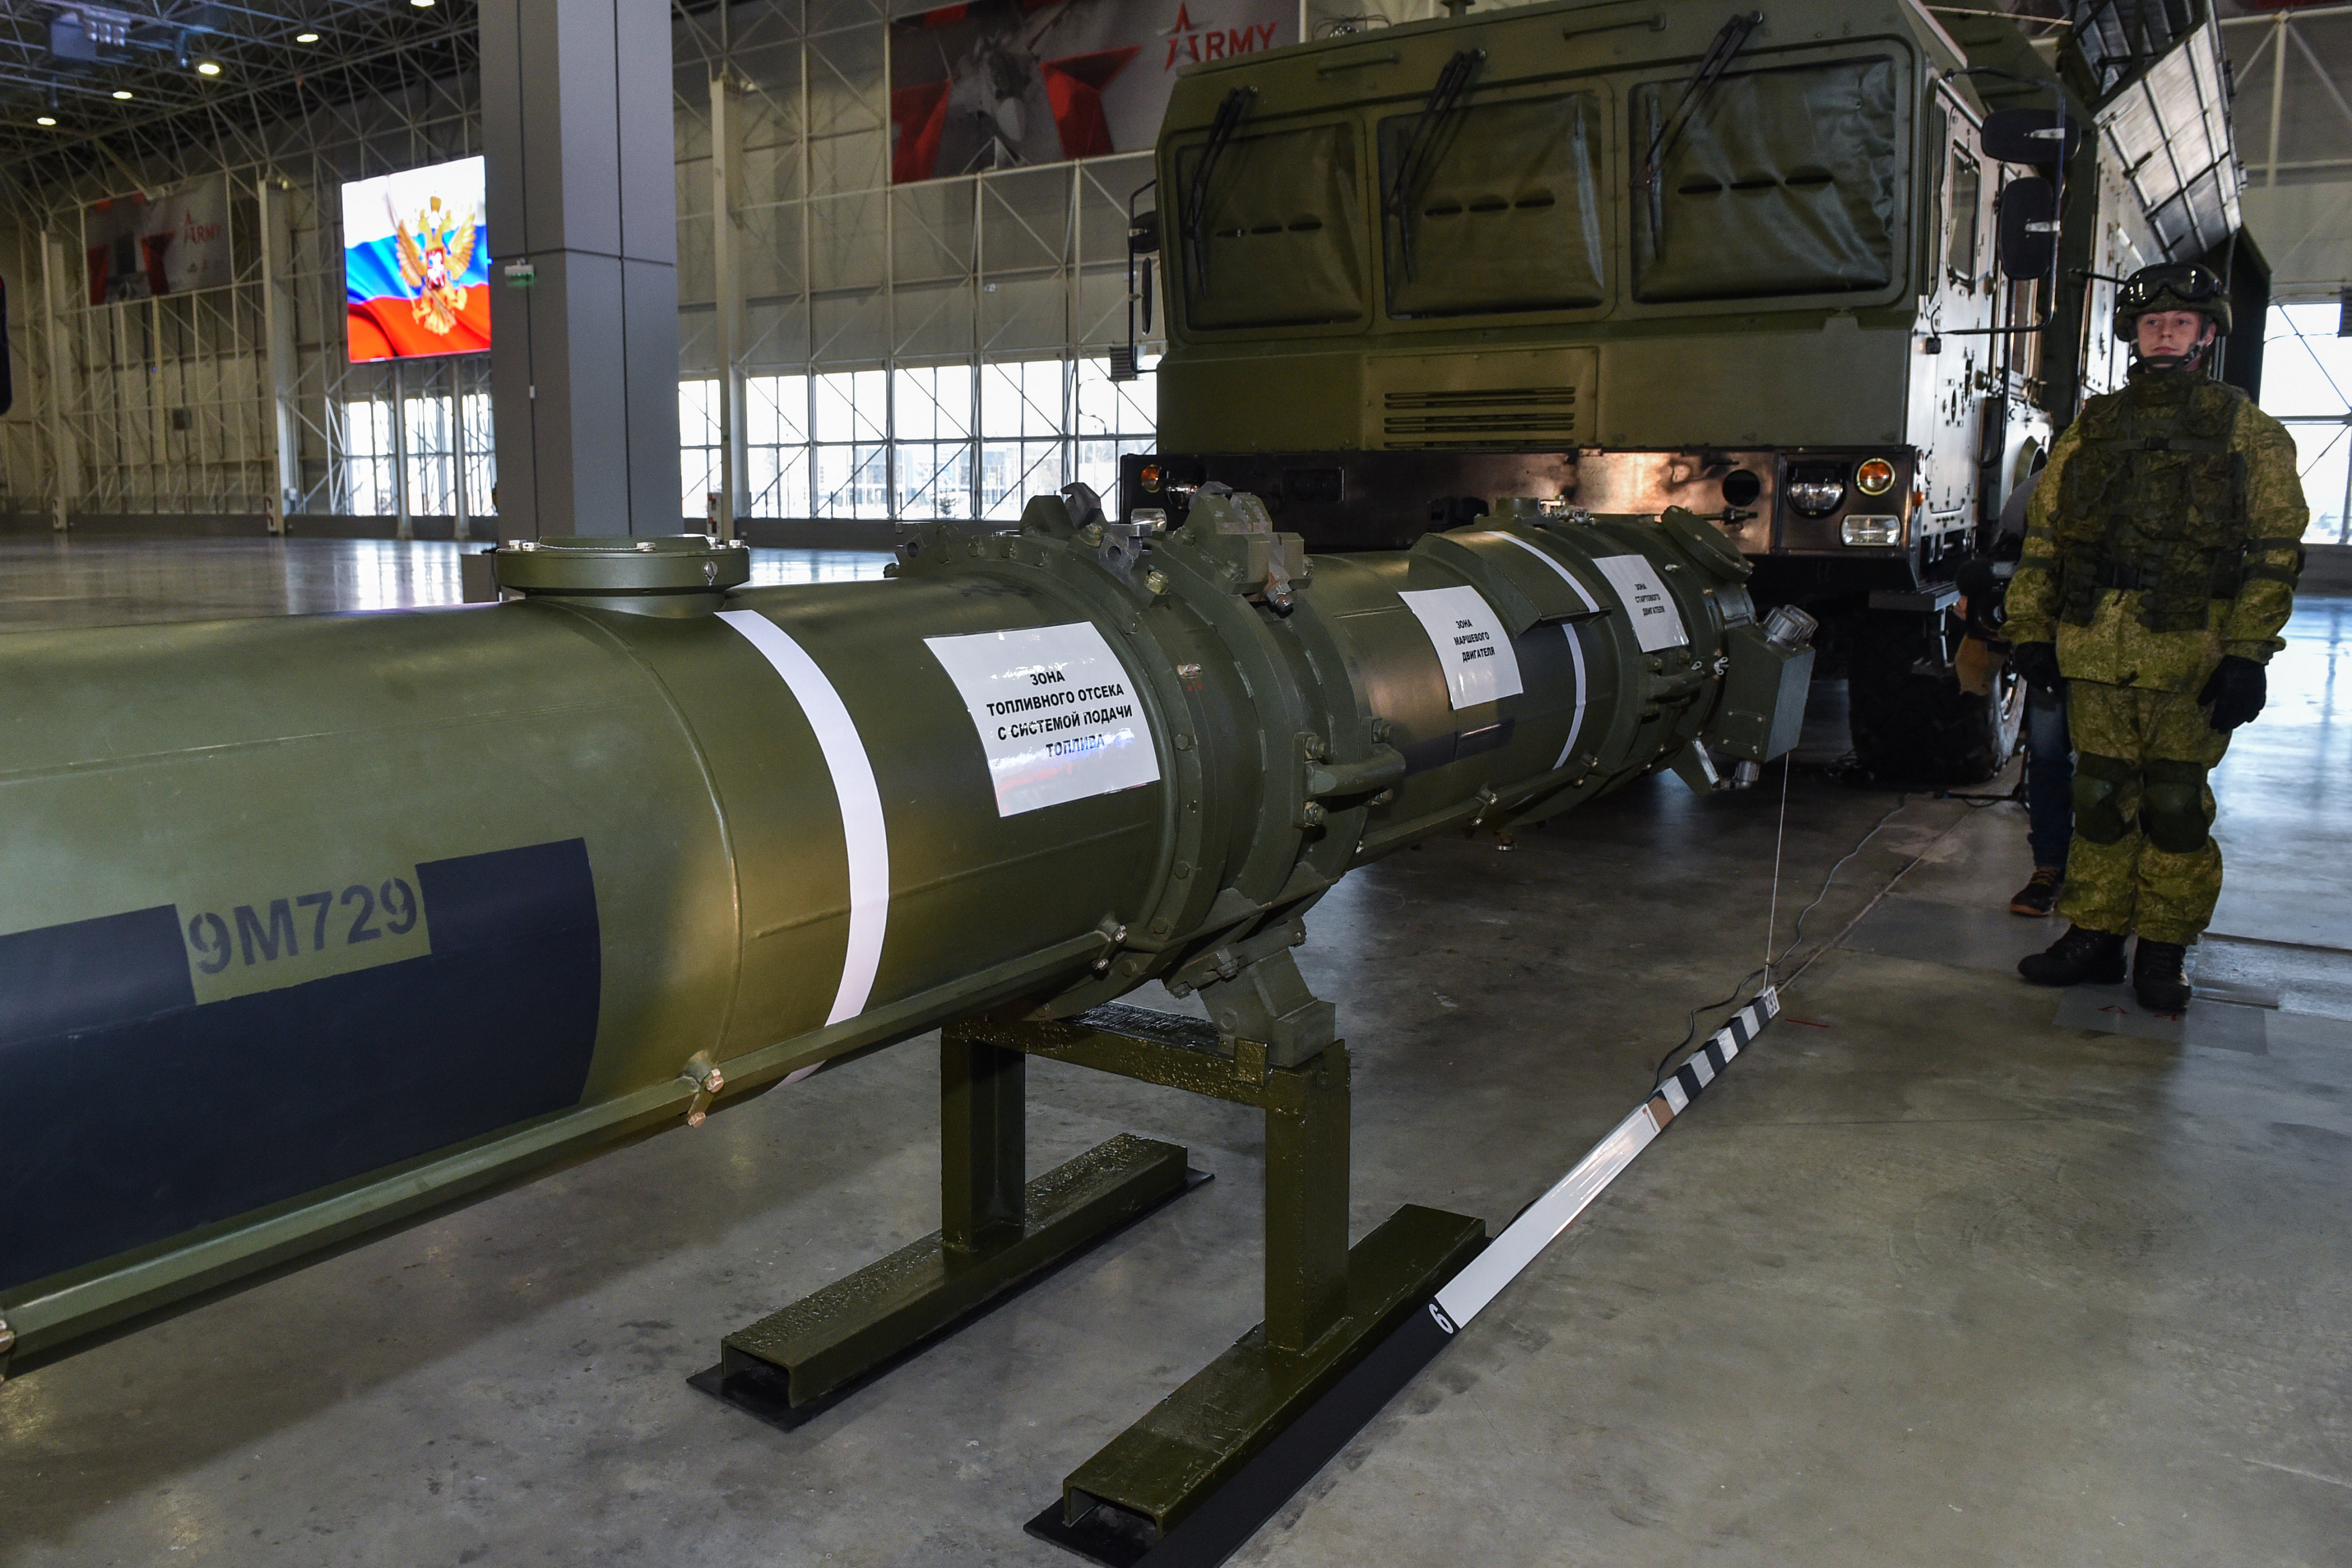 Amid Ukraine crisis, Russia threatens to deploy mid-range nuclear missiles  in Europe | South China Morning Post